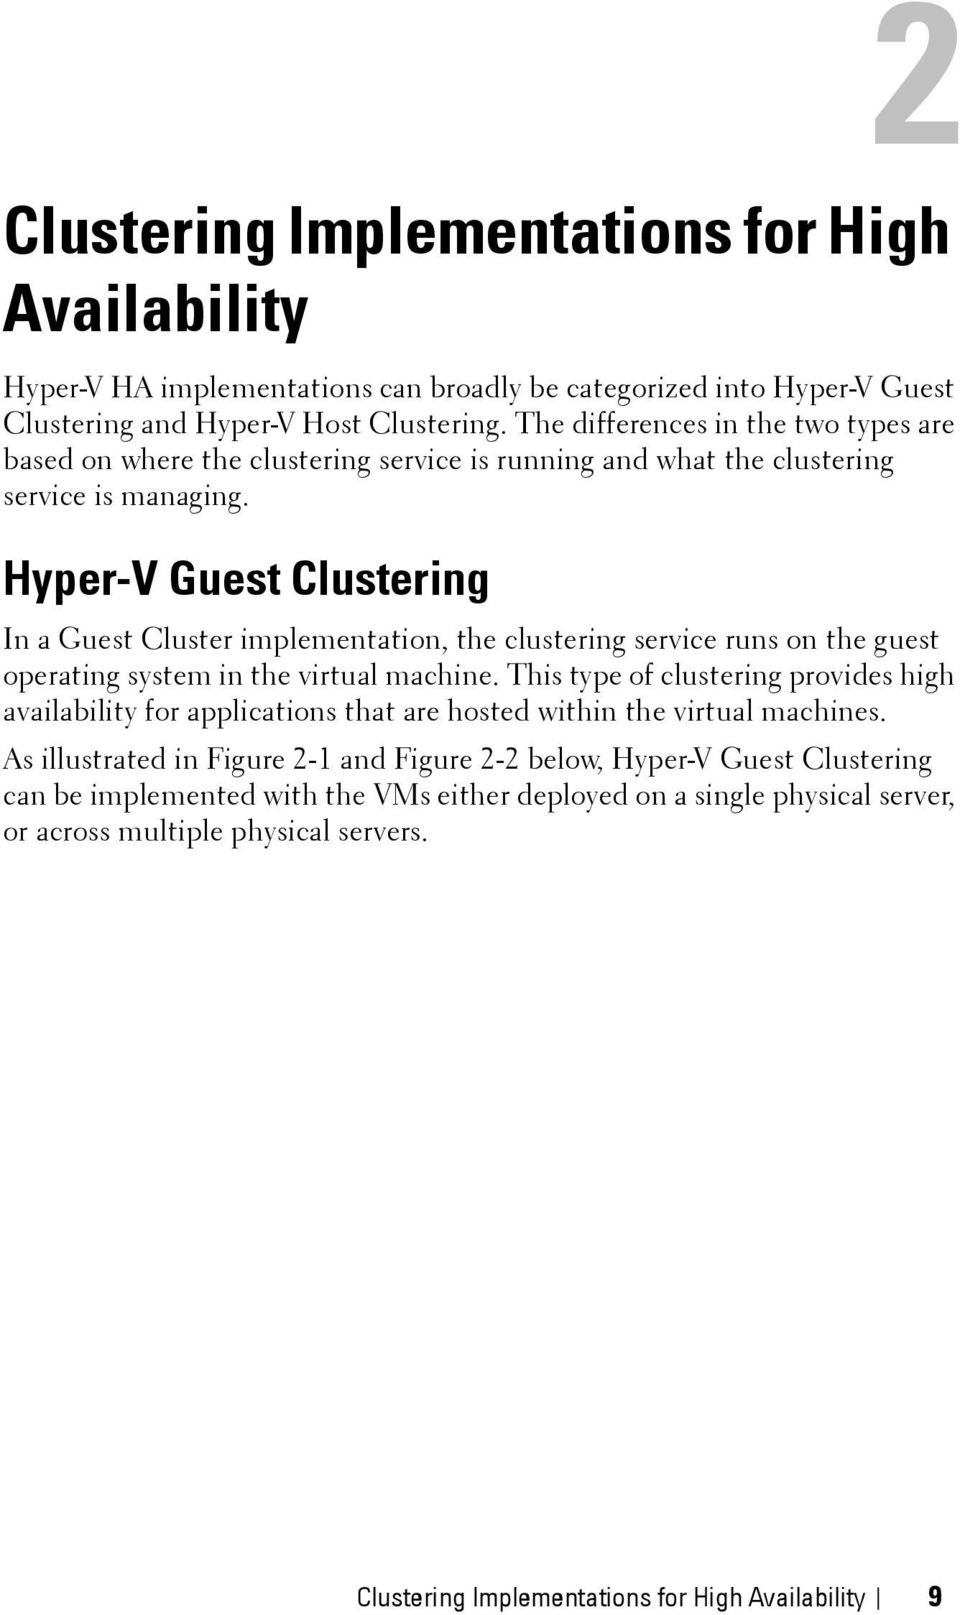 Hyper-V Guest Clustering In a Guest Cluster implementation, the clustering service runs on the guest operating system in the virtual machine.